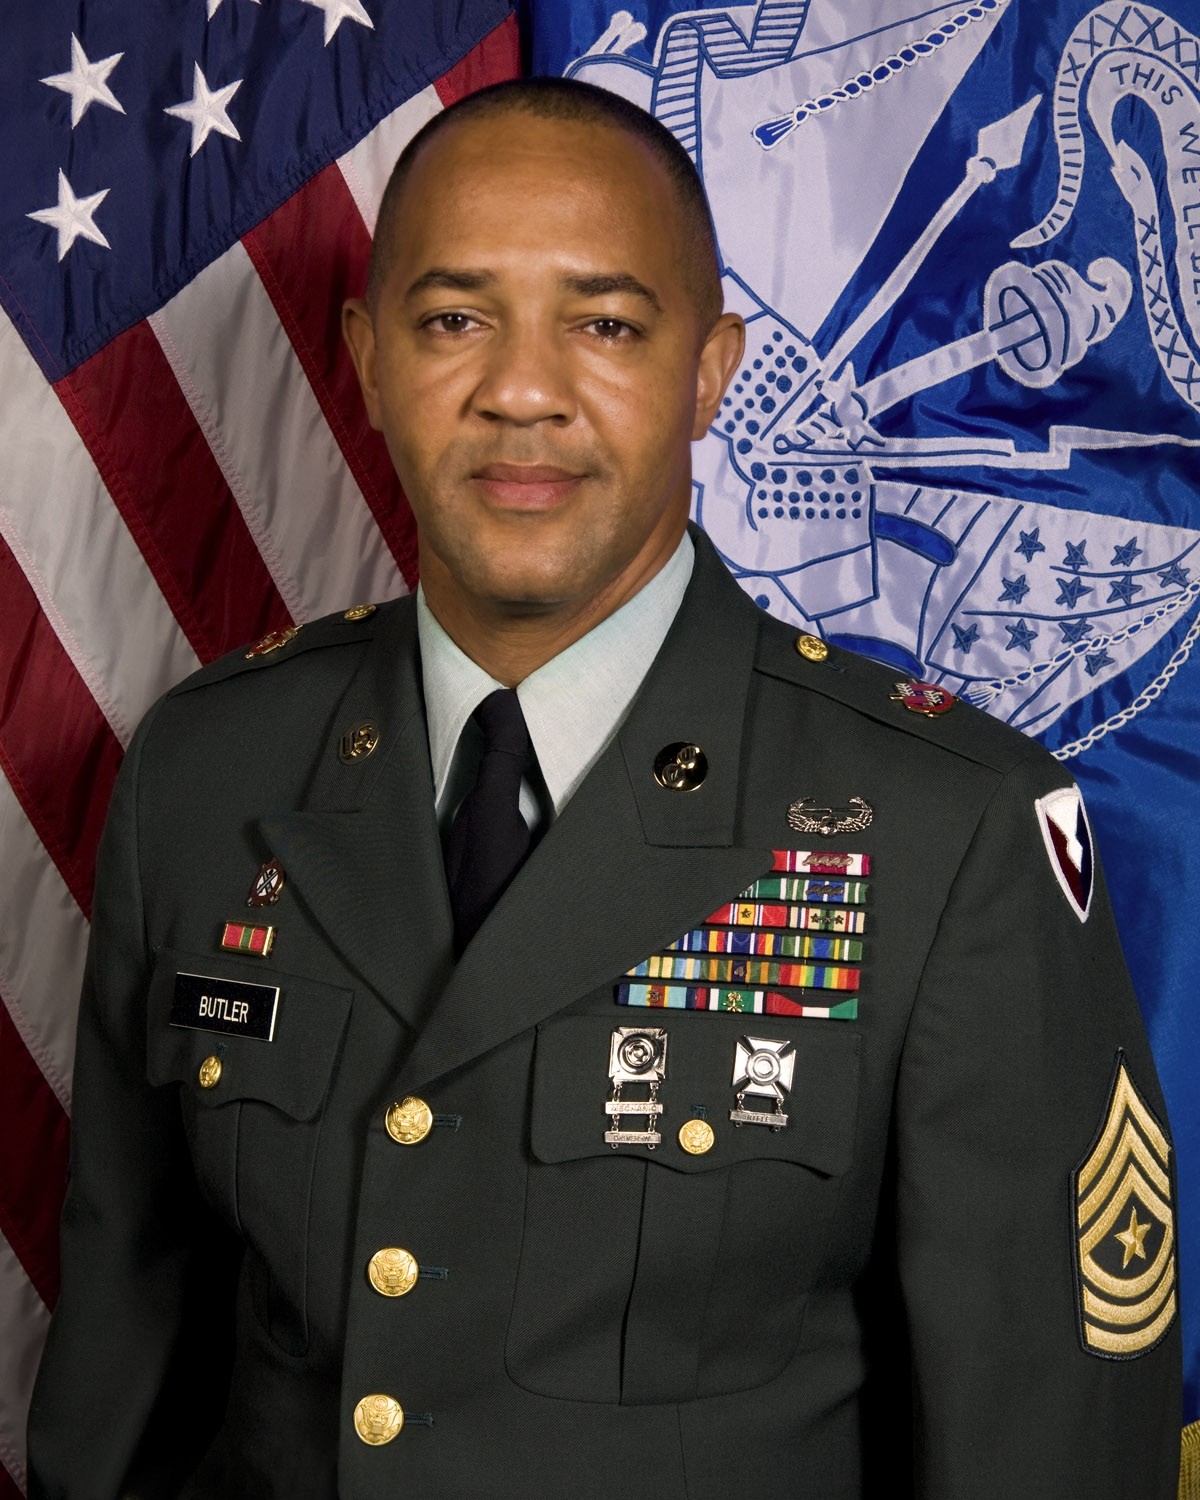 Depot Welcomes New Sergeant Major Article The United States Army